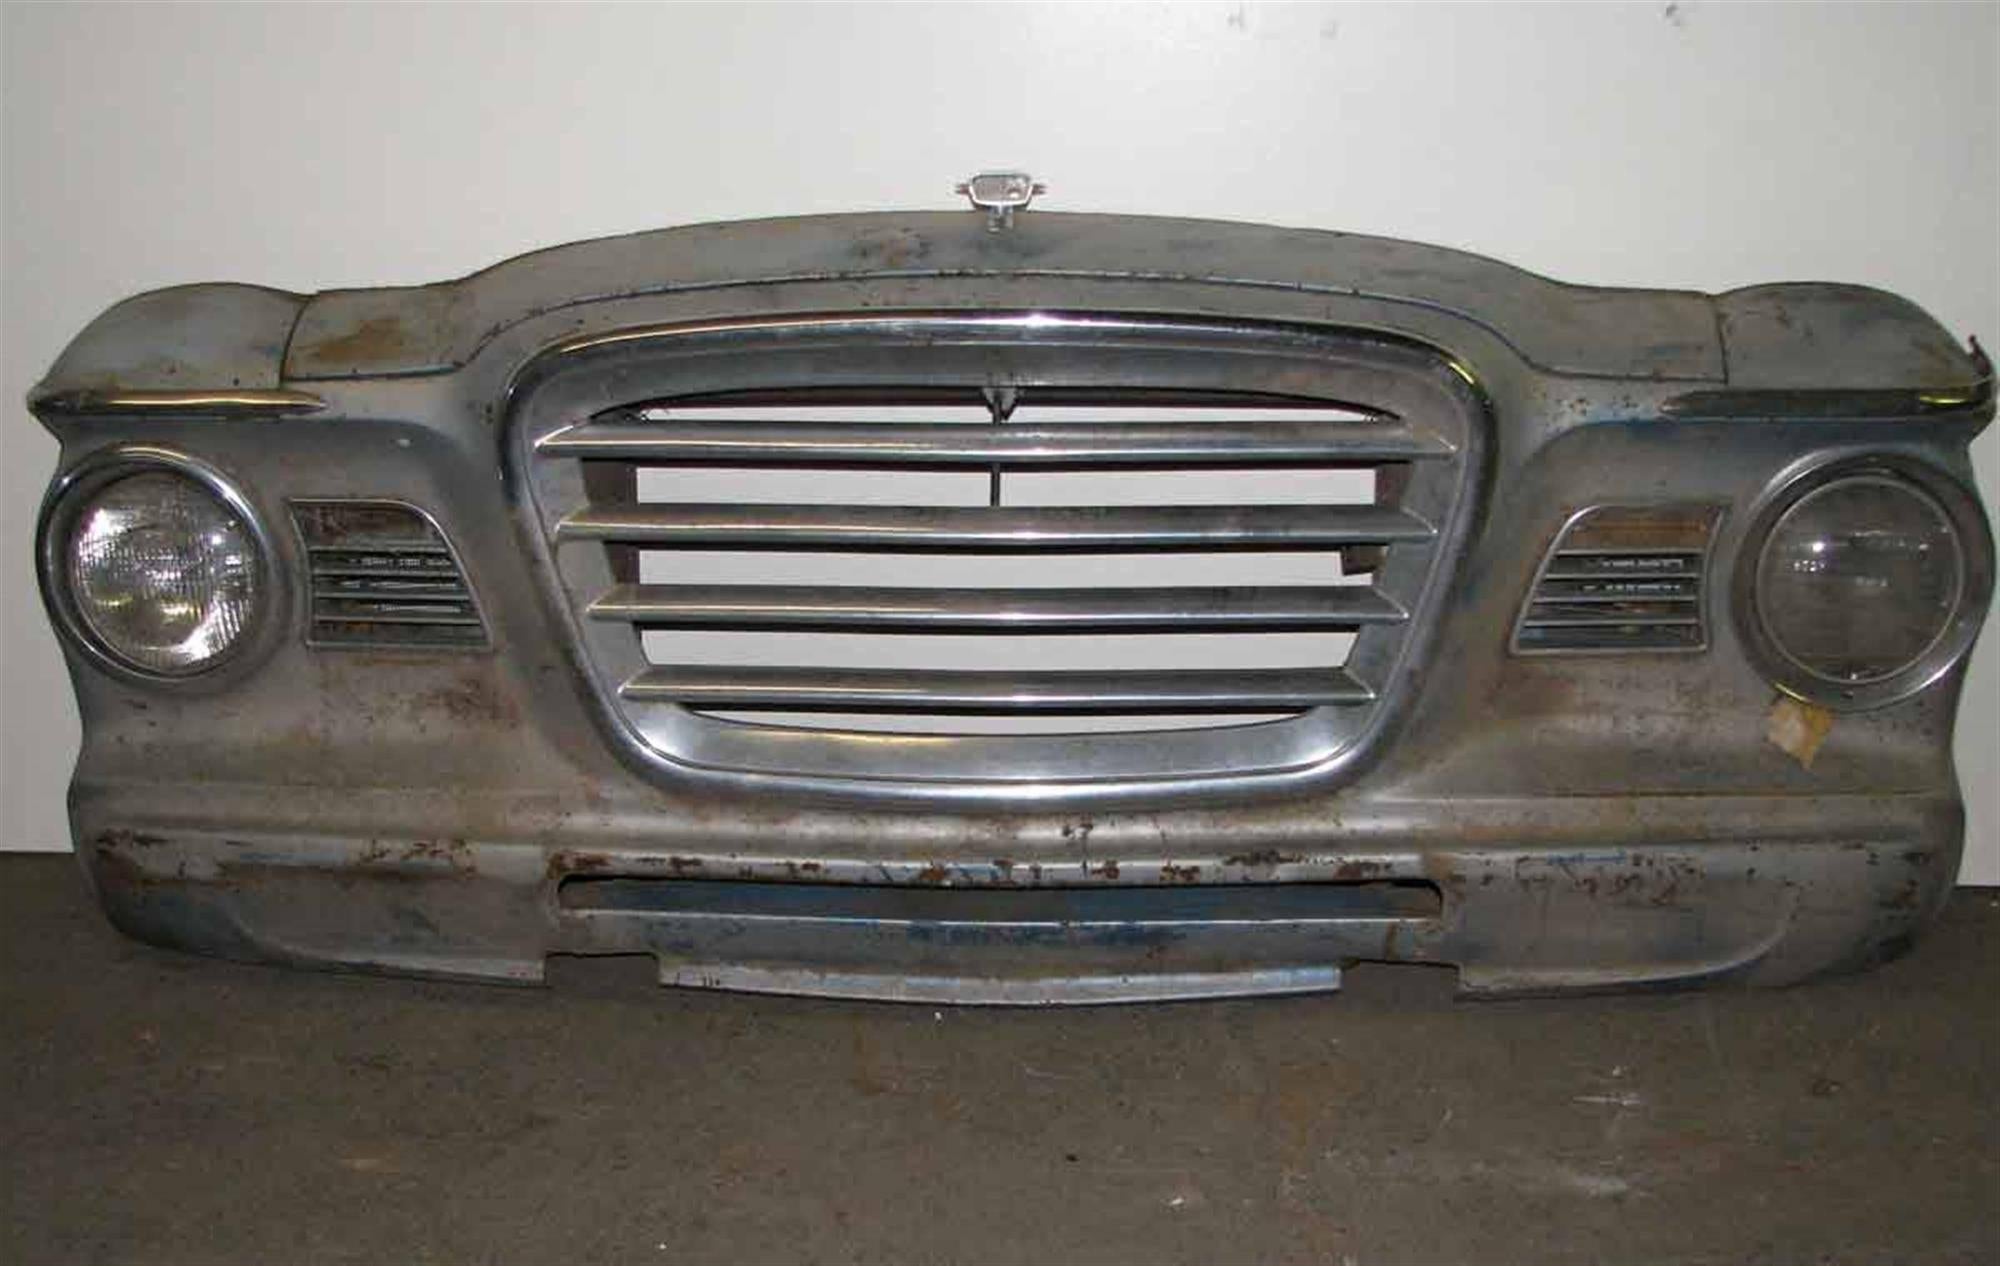 1960s Studebaker car front that is ready to hang on the wall. This can be seen at our 149 Madison Ave location in Manhattan.